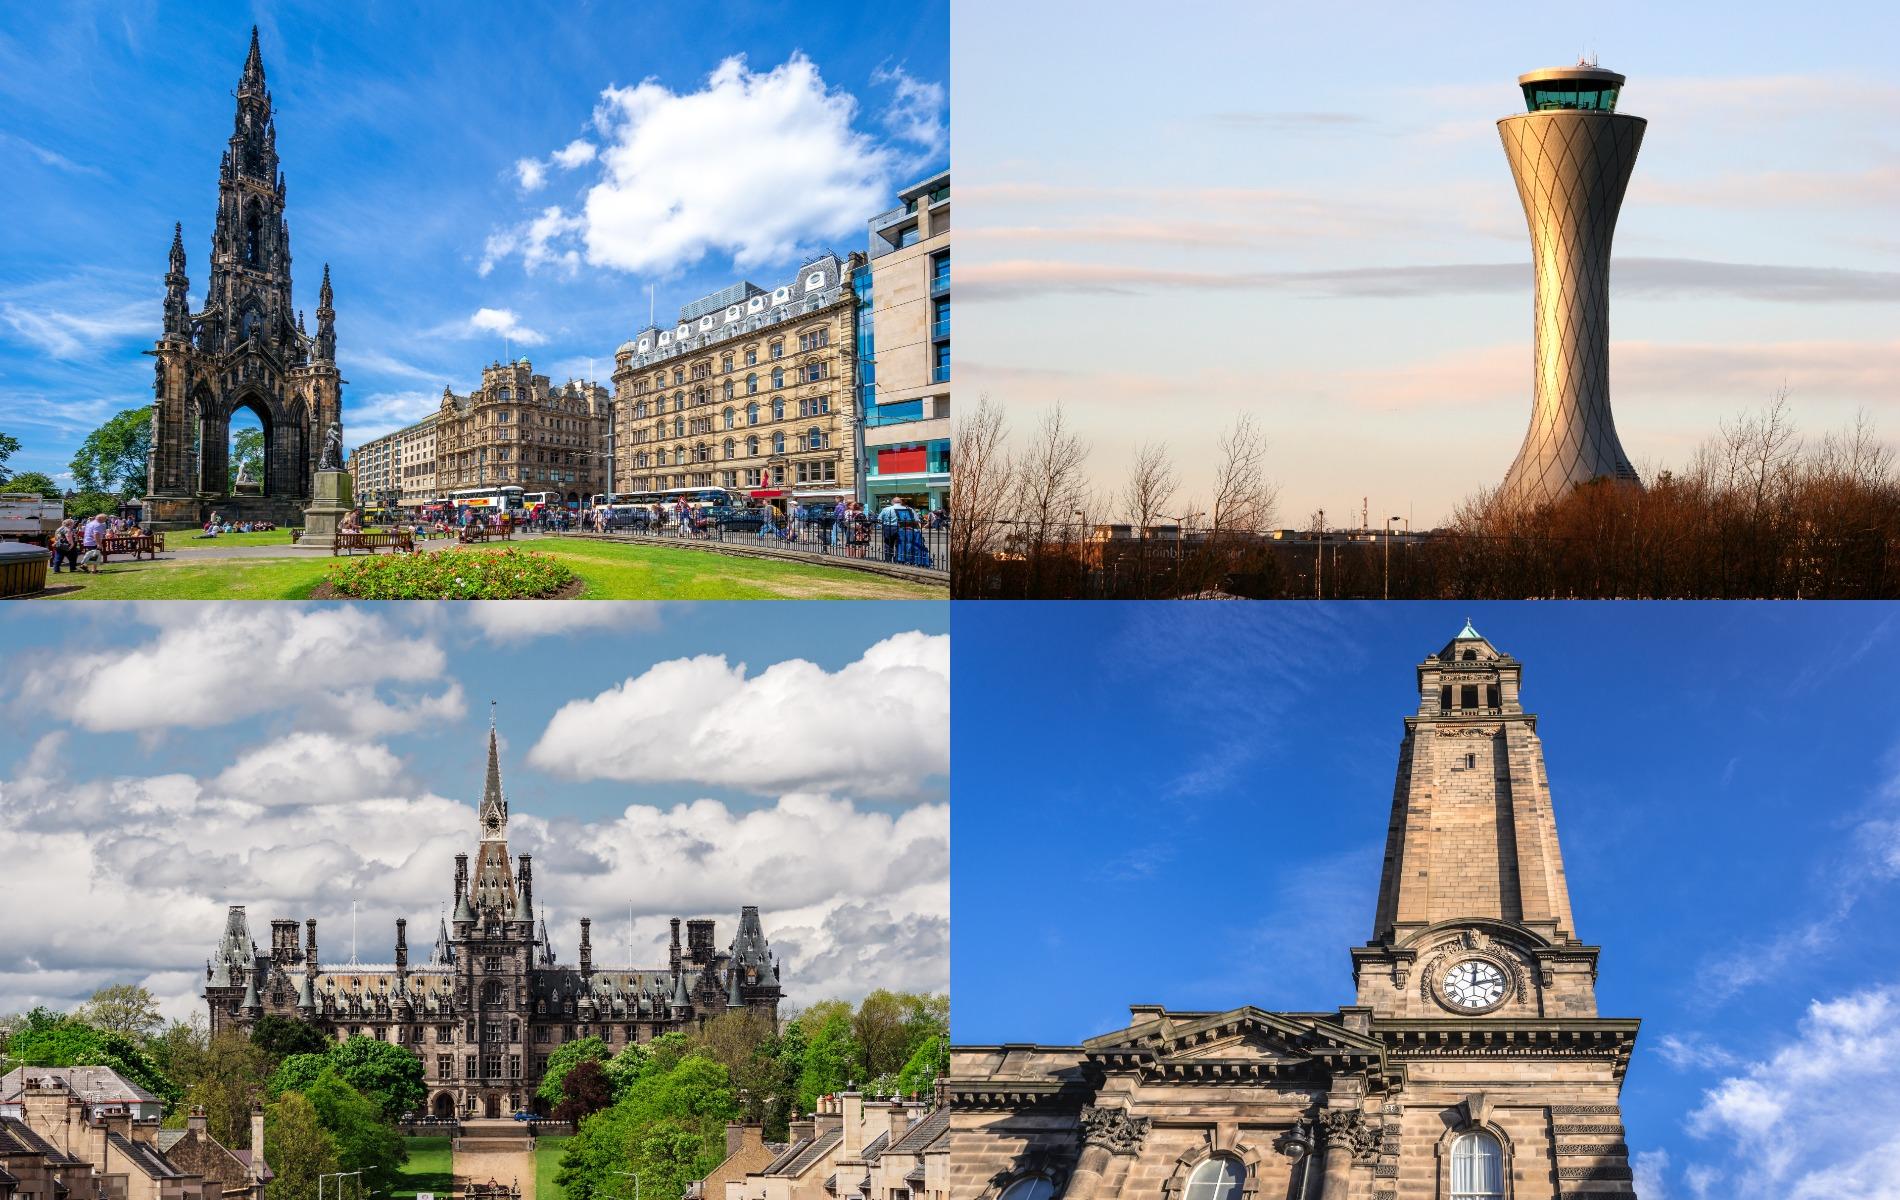 These 9 buildings are the tallest in Edinburgh - reaching up to 90